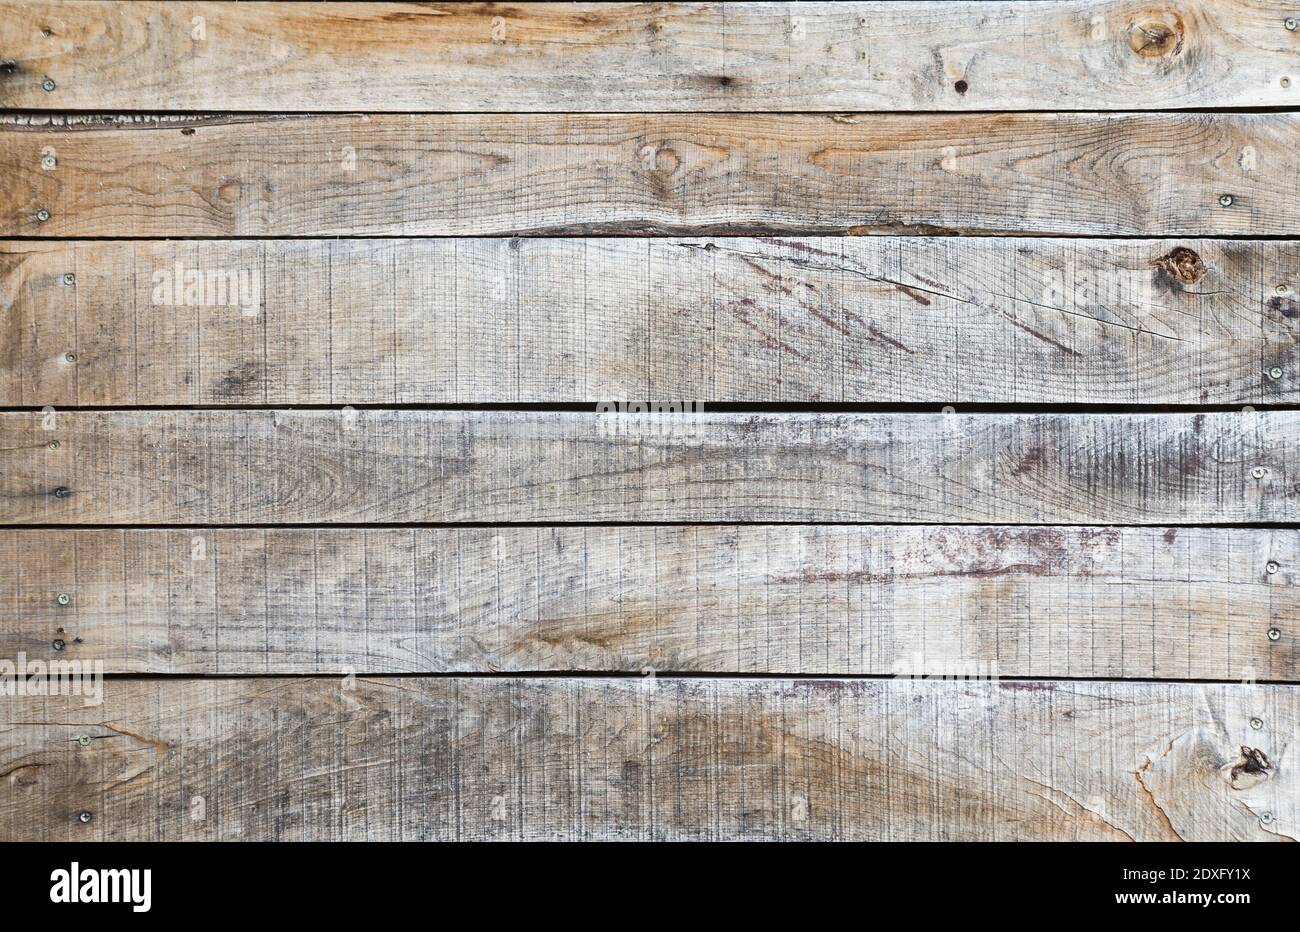 An Aged wooden planks in horizontal position for wedding, Christmas or any other event background. Stock Photo